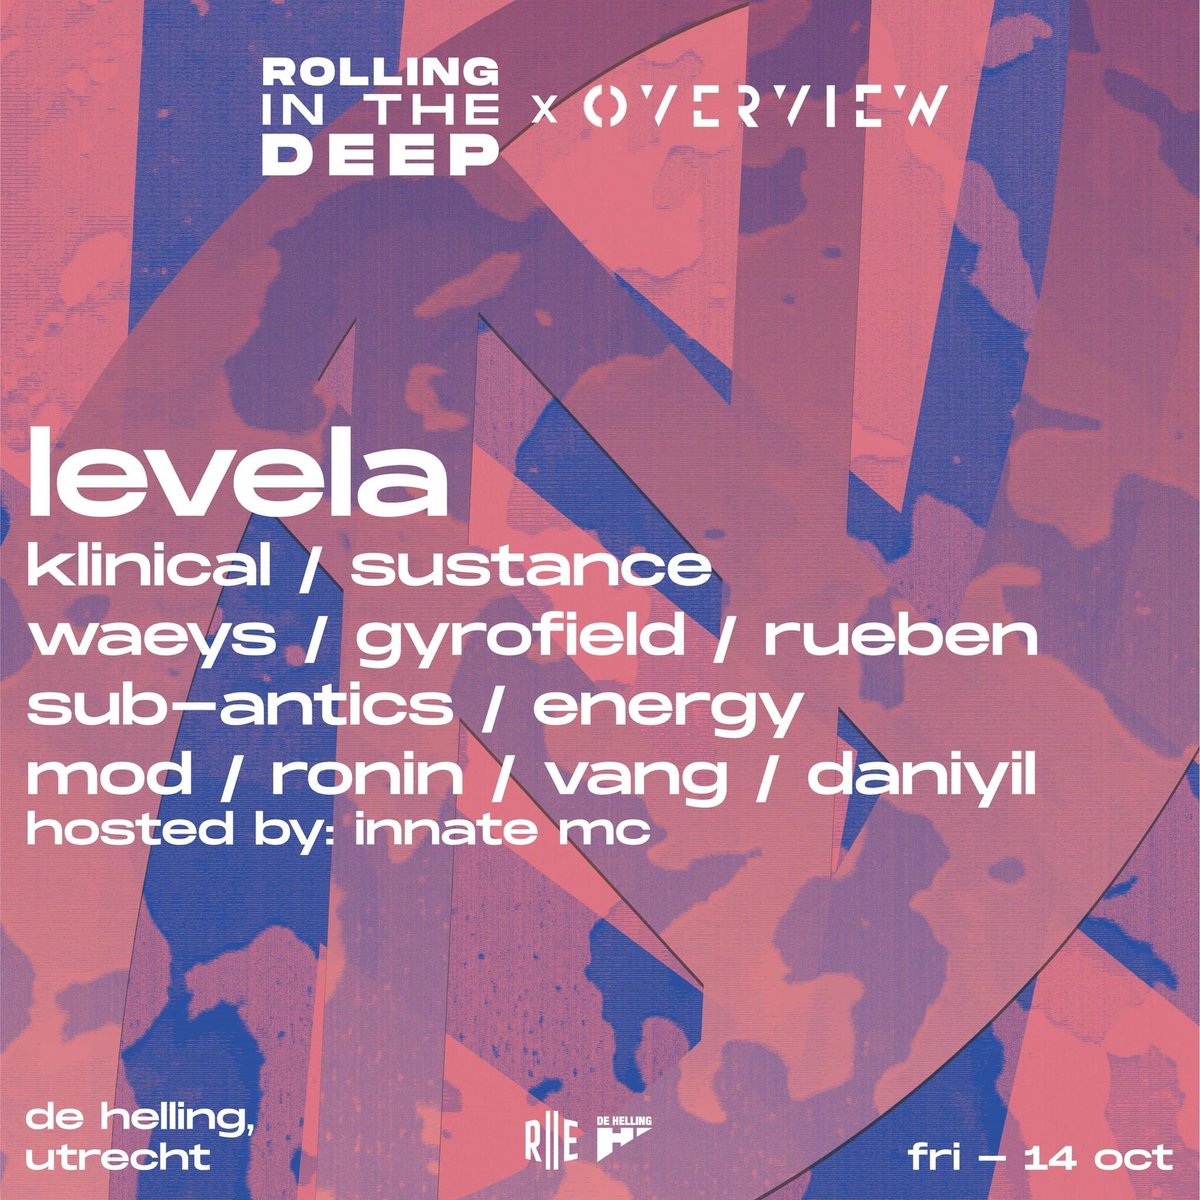 Netherlands crew, we are in Utrecht this Friday with Rolling Eclectic 🇳🇱 We've got a rather large Overview line up for you... Lekkkkker